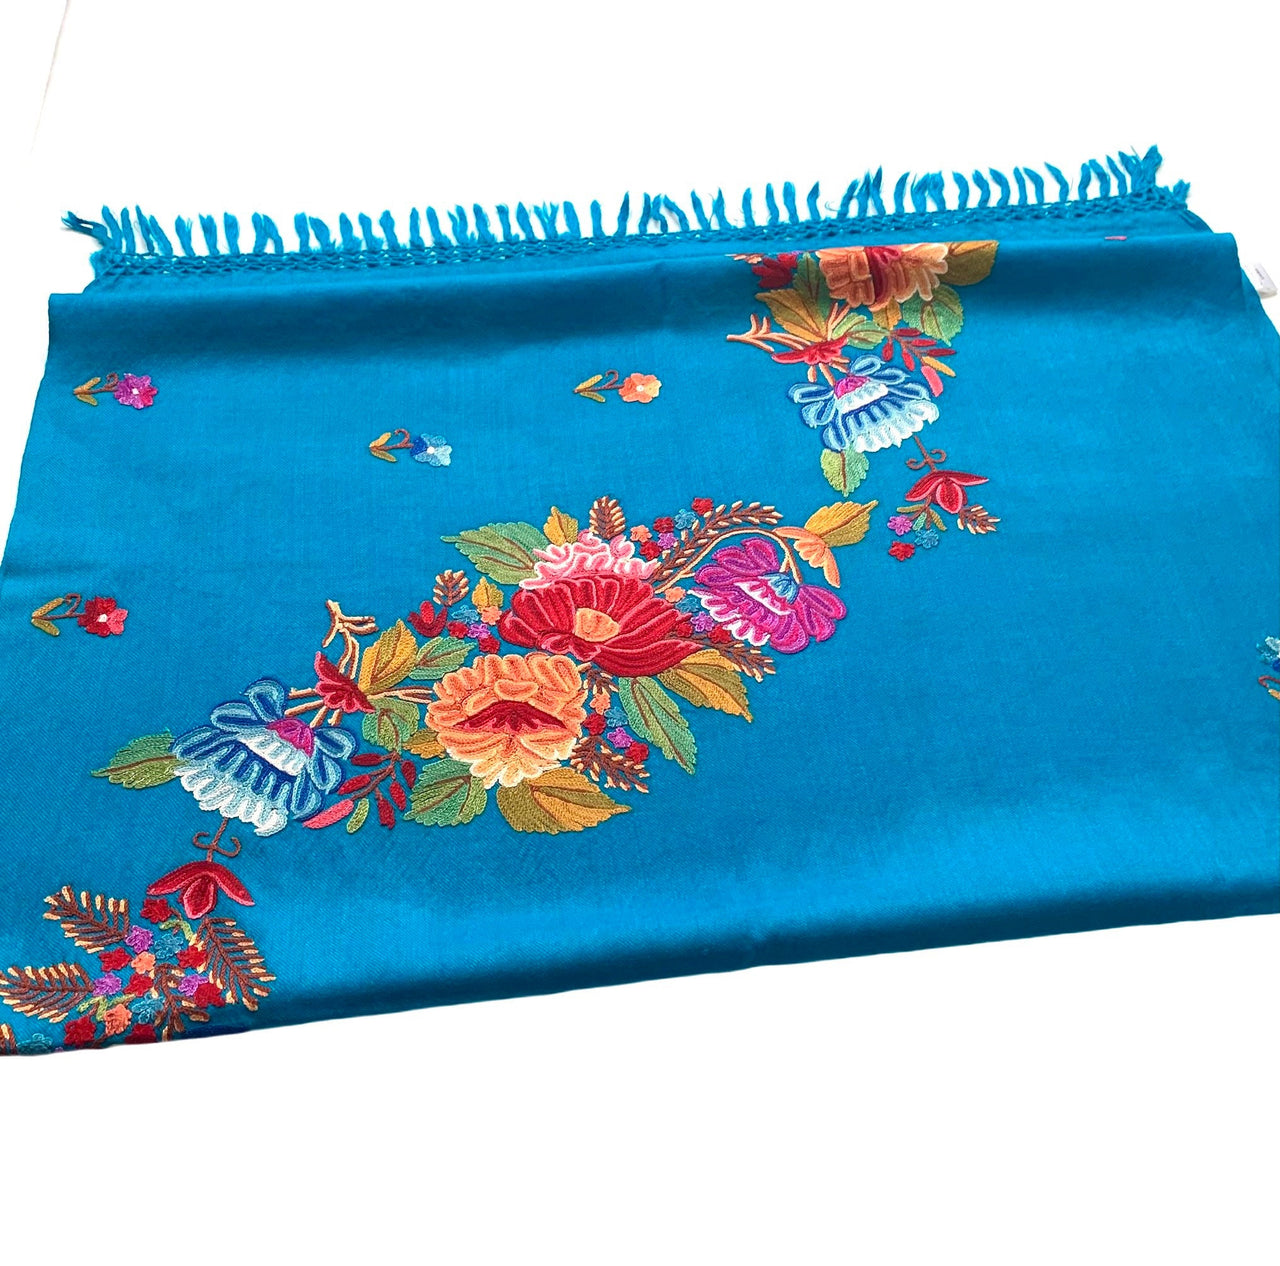 Stunning Turquoise Wool Shawl  Multi-Coloured Silk Embroidered Scarf/Stole /women’s Wrap/